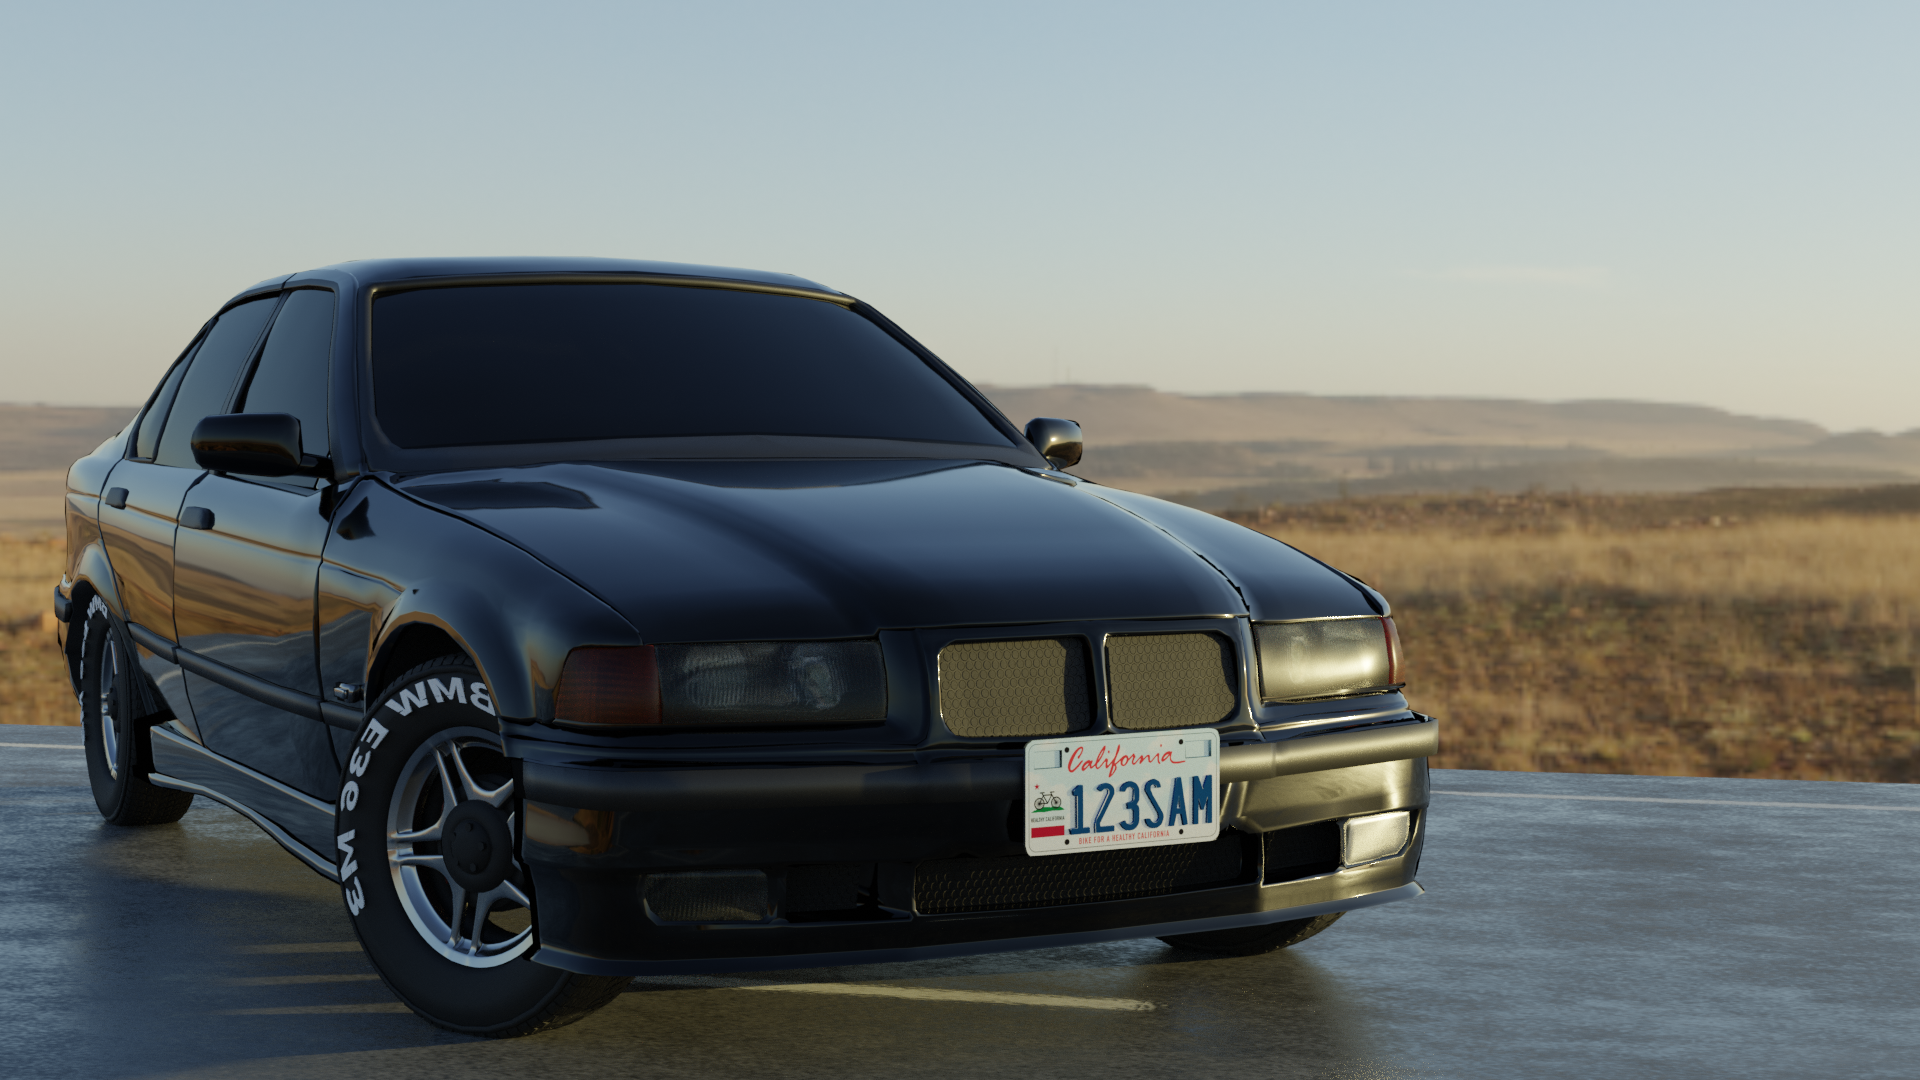 Imperfect Black BMW E36 preview image 1